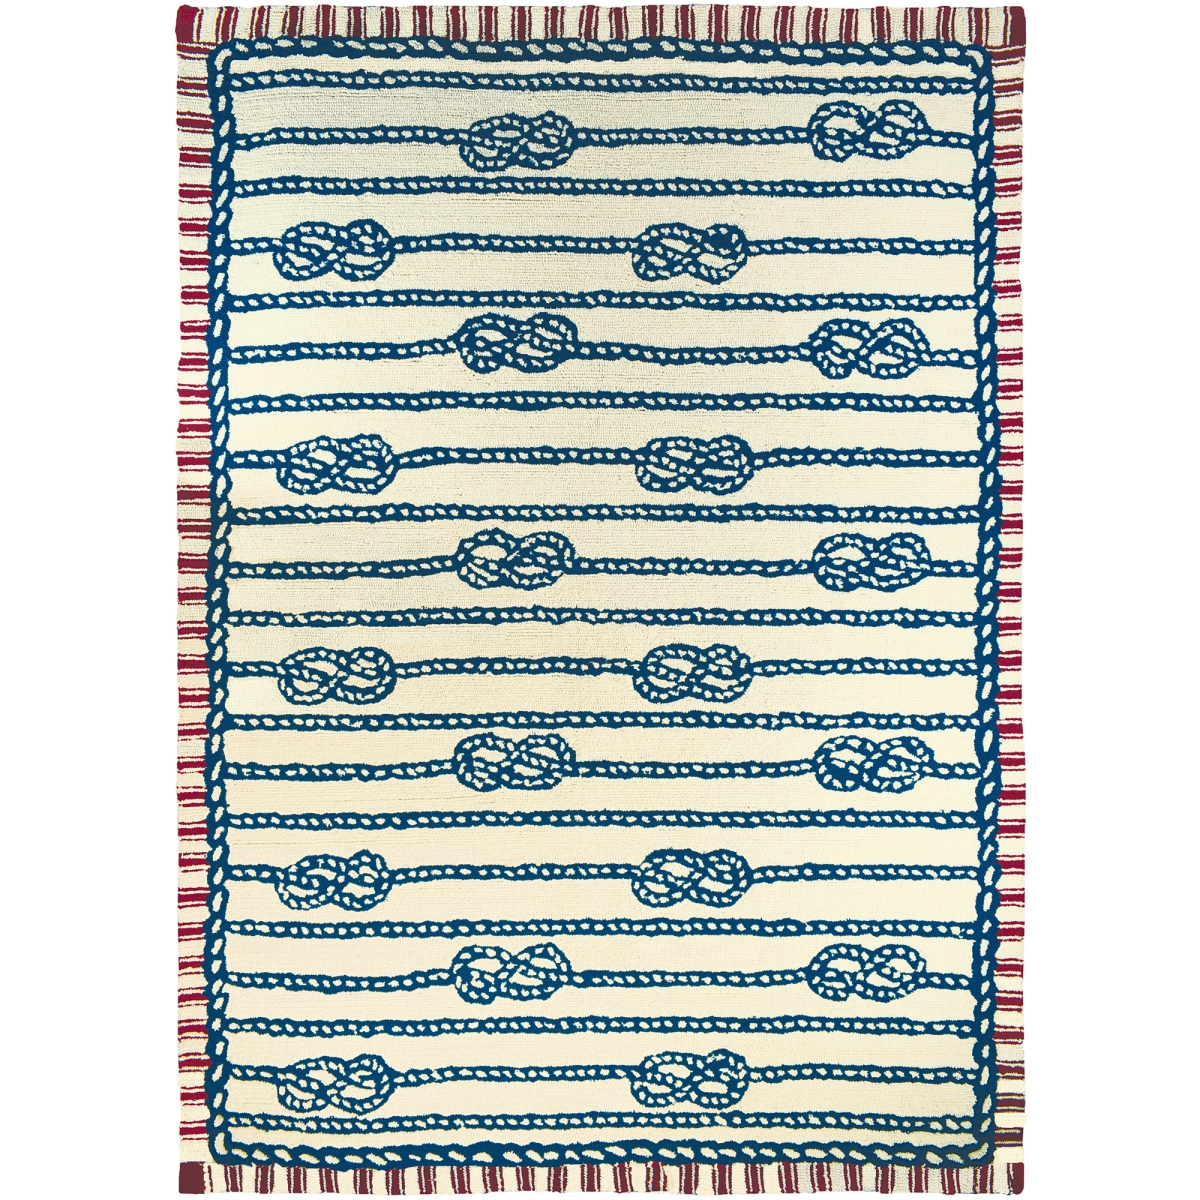 Pps-sch001e 7 X 5 X 0.5 Ft. Hand Hooked Sailors Knot Indoor & Outdoor Area Rug, Multi Color